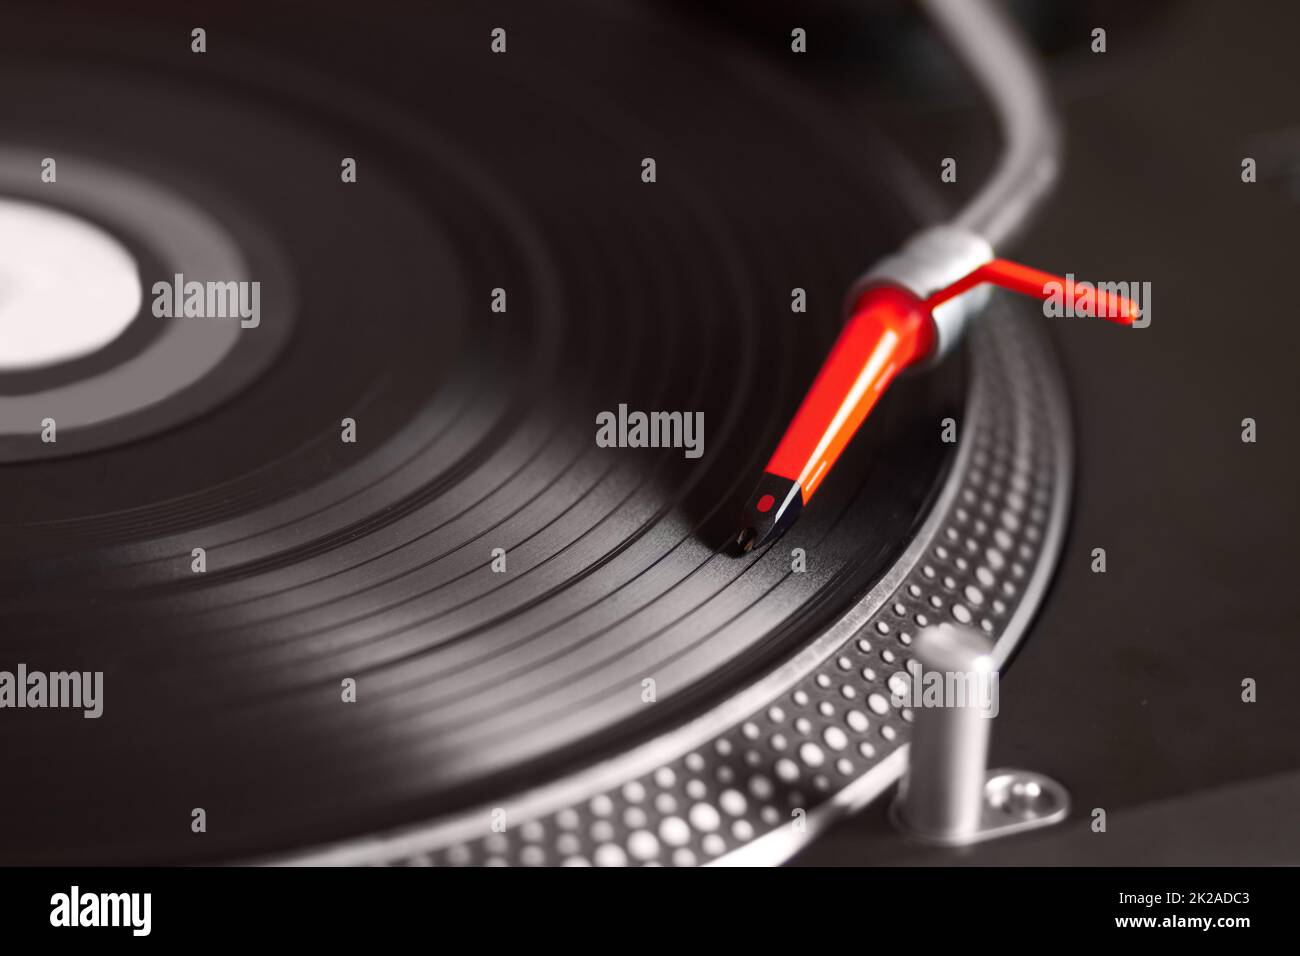 Retro records. Closeup of a turntable and record. Stock Photo